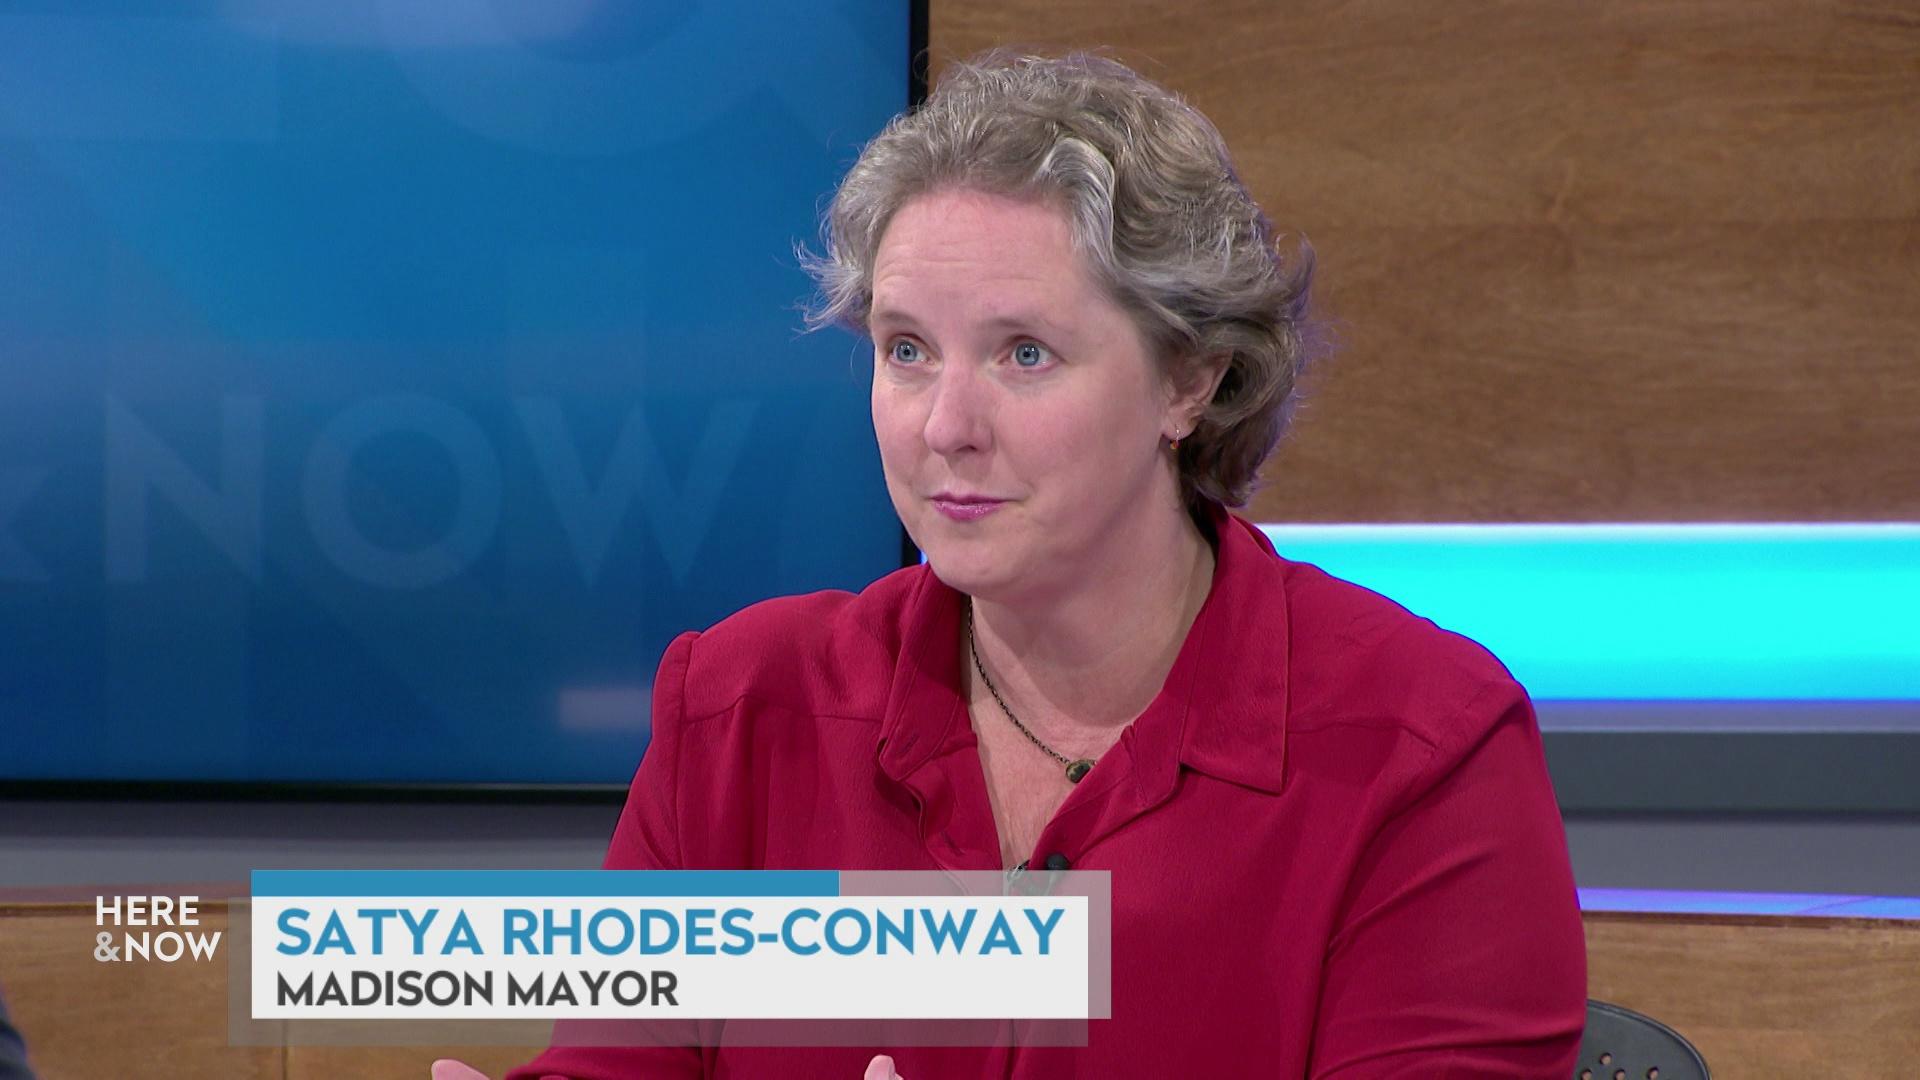 A still image shows Satya Rhodes-Conway seated at the 'Here & Now' set featuring wood paneling, with a graphic at bottom reading 'Satya Rhodes-Conway' and 'Madison Mayor.'